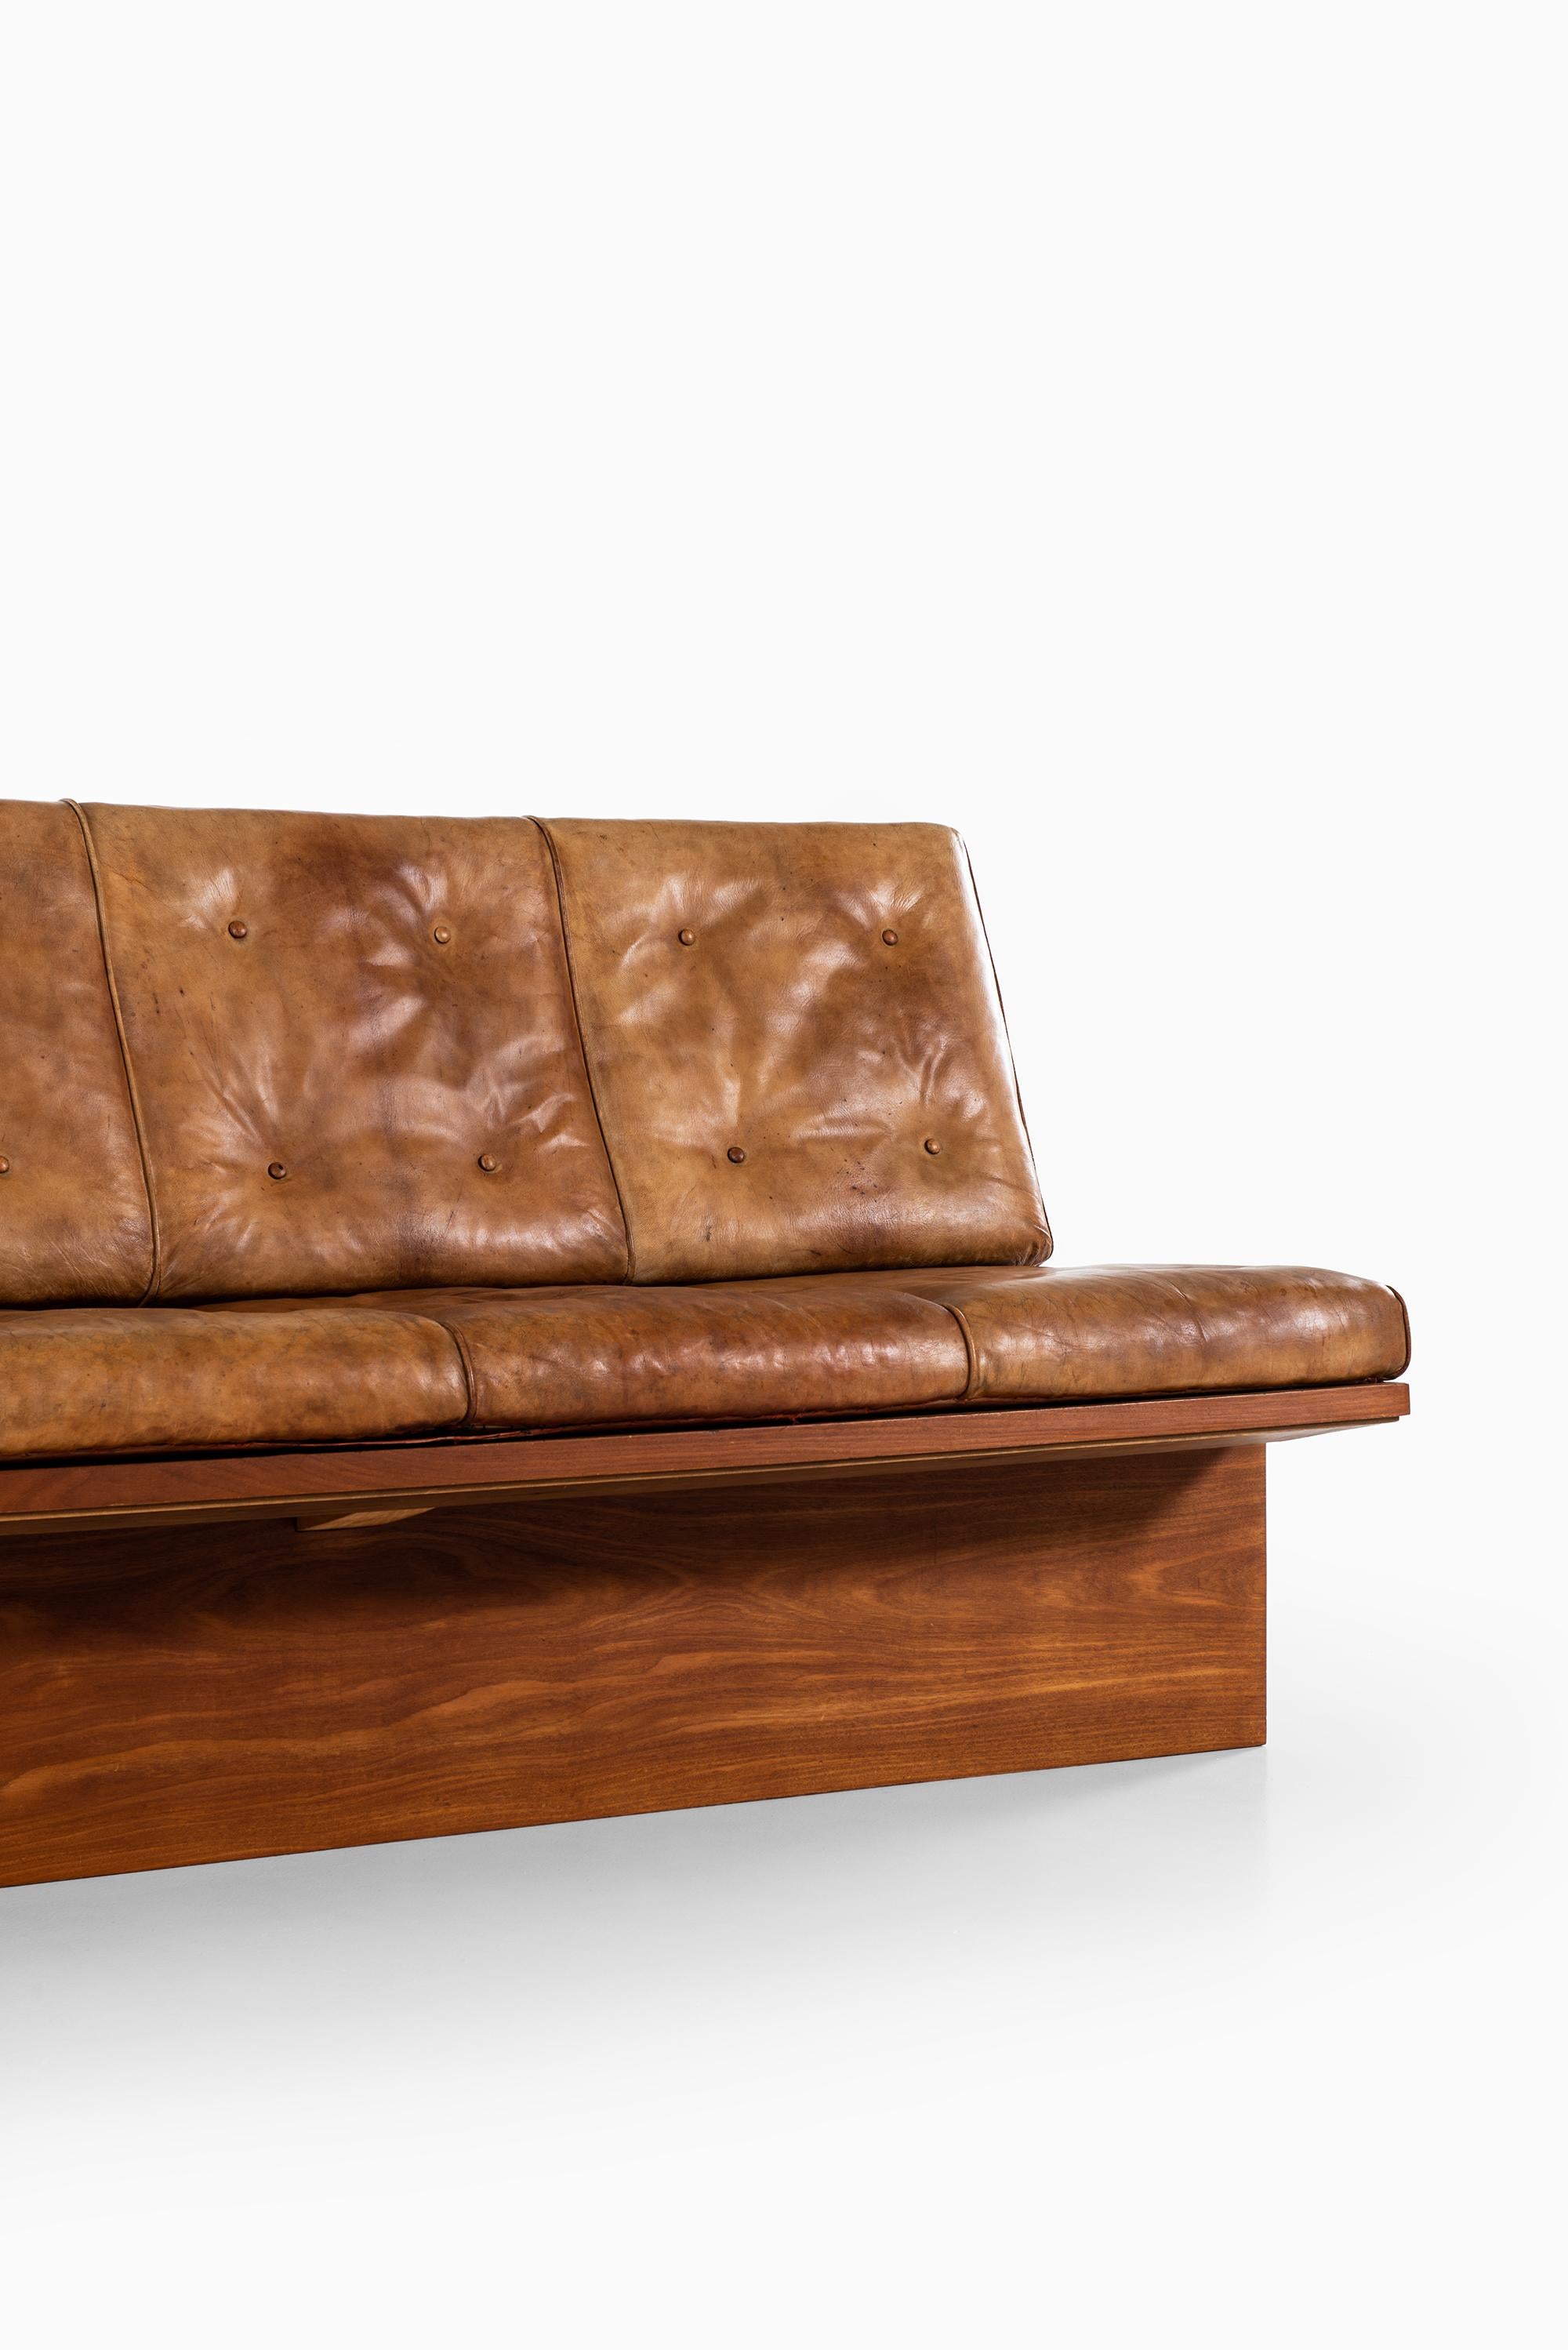 Leather Ole Wanscher Unique Hallway Sofa Produced by Cabinetmaker A.J. Iversen